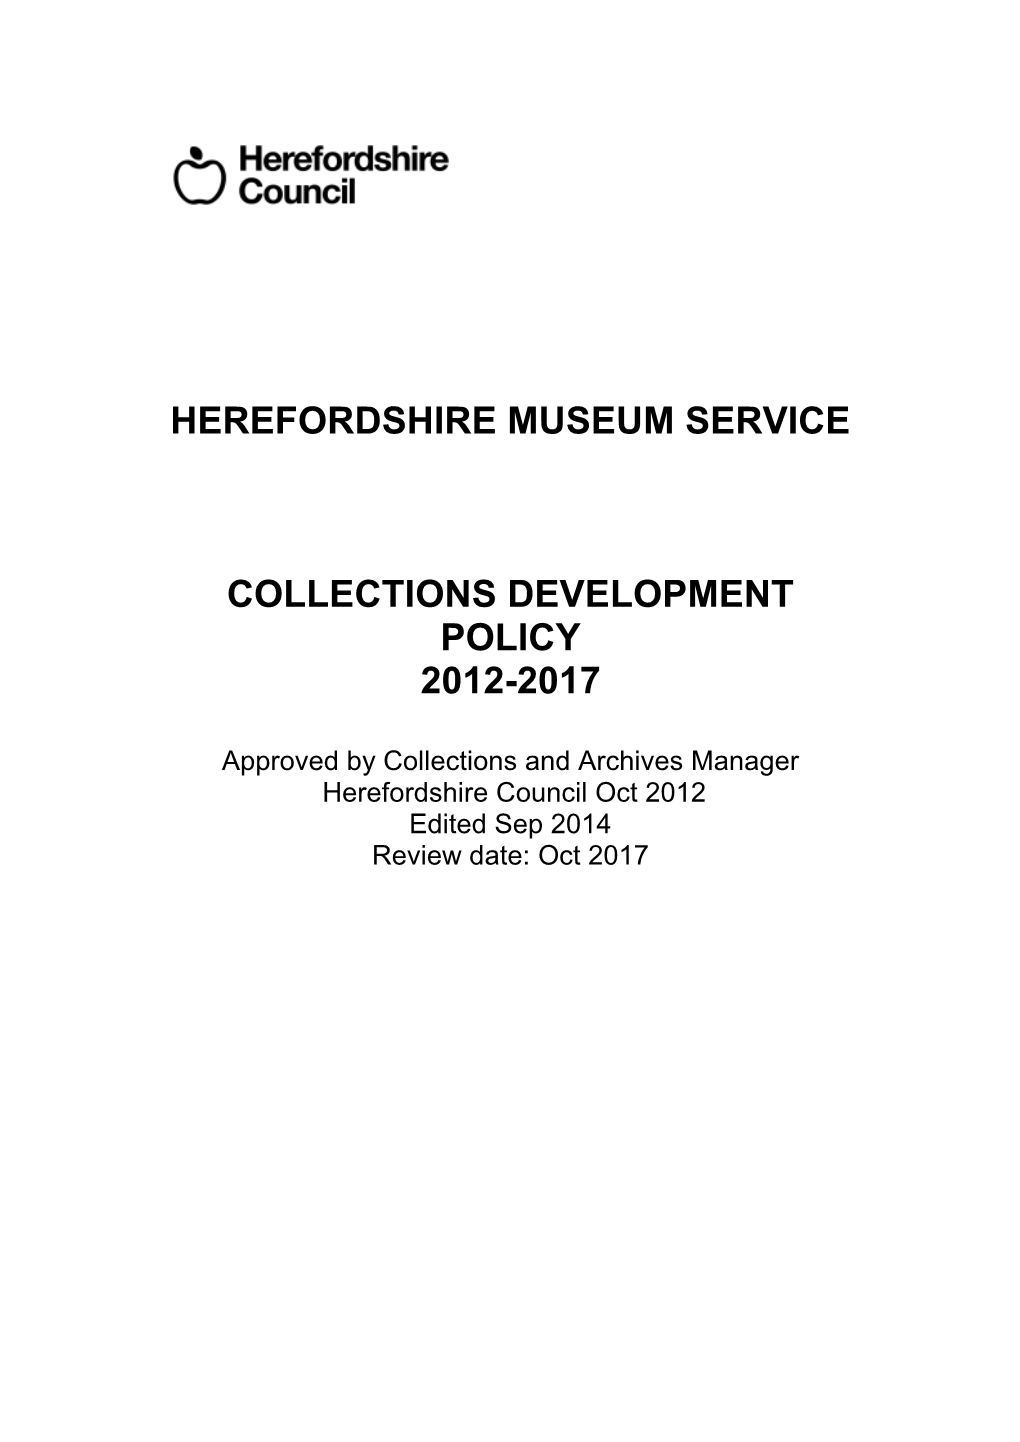 Herefordshire Museum Service Collections Development Policy